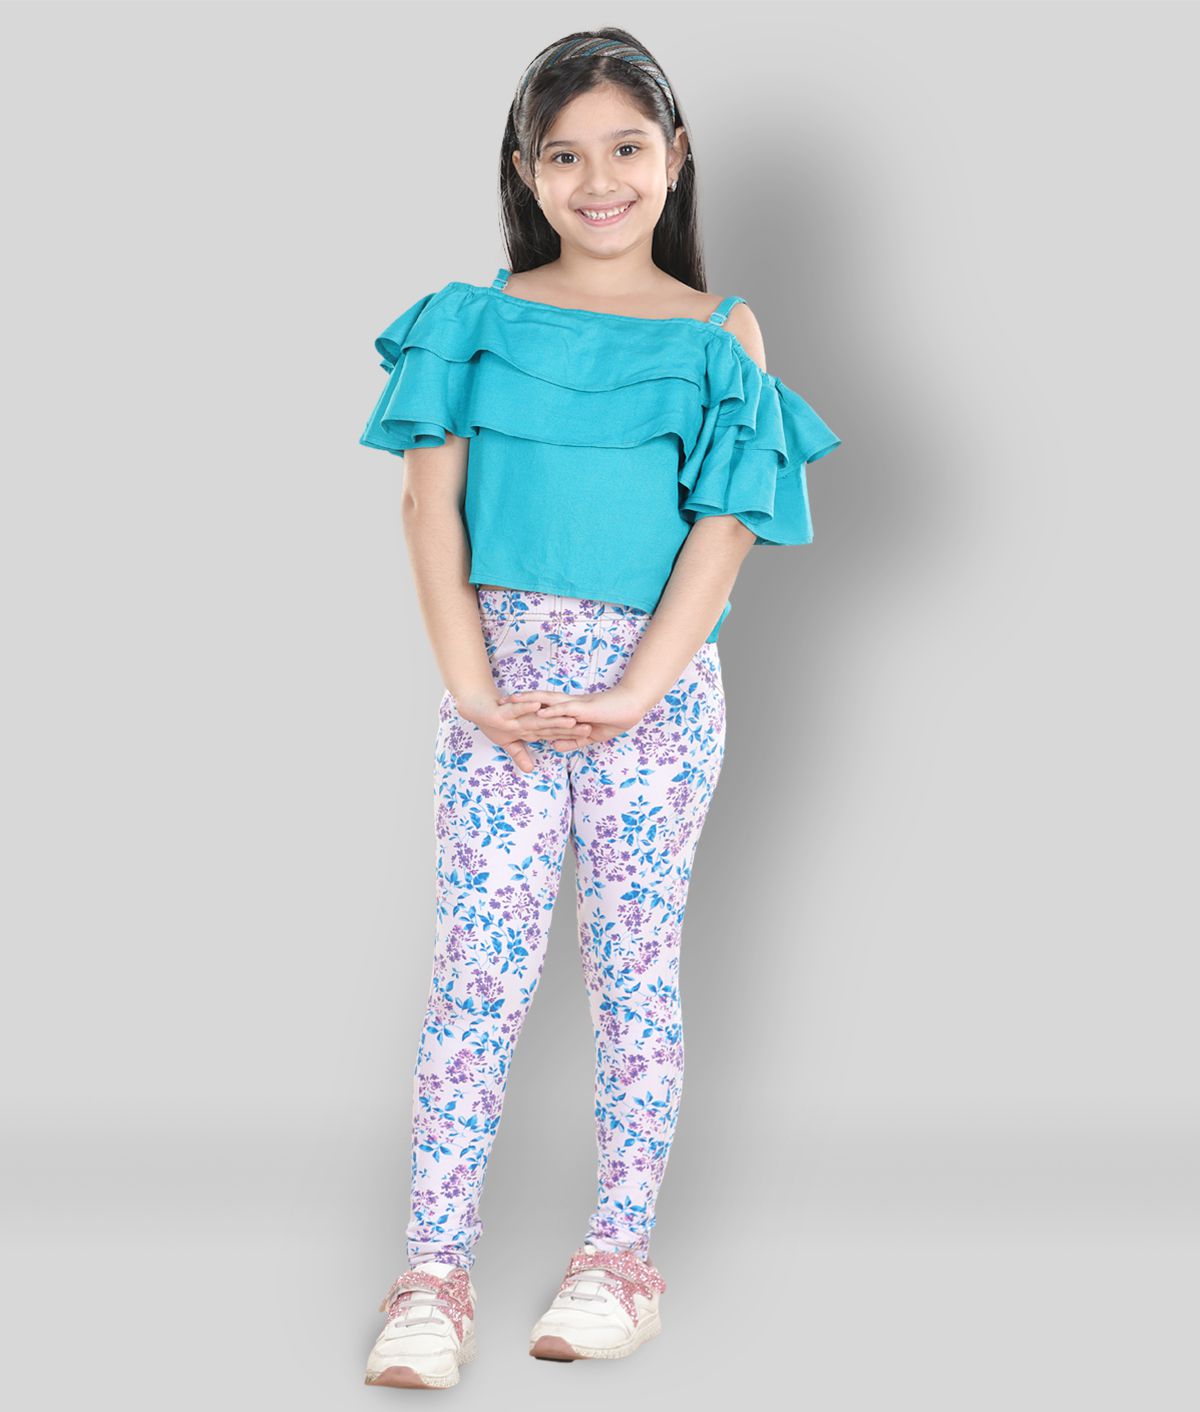     			StyleStone Girls Cotton Floral Printed Jegging and Turquoise Top